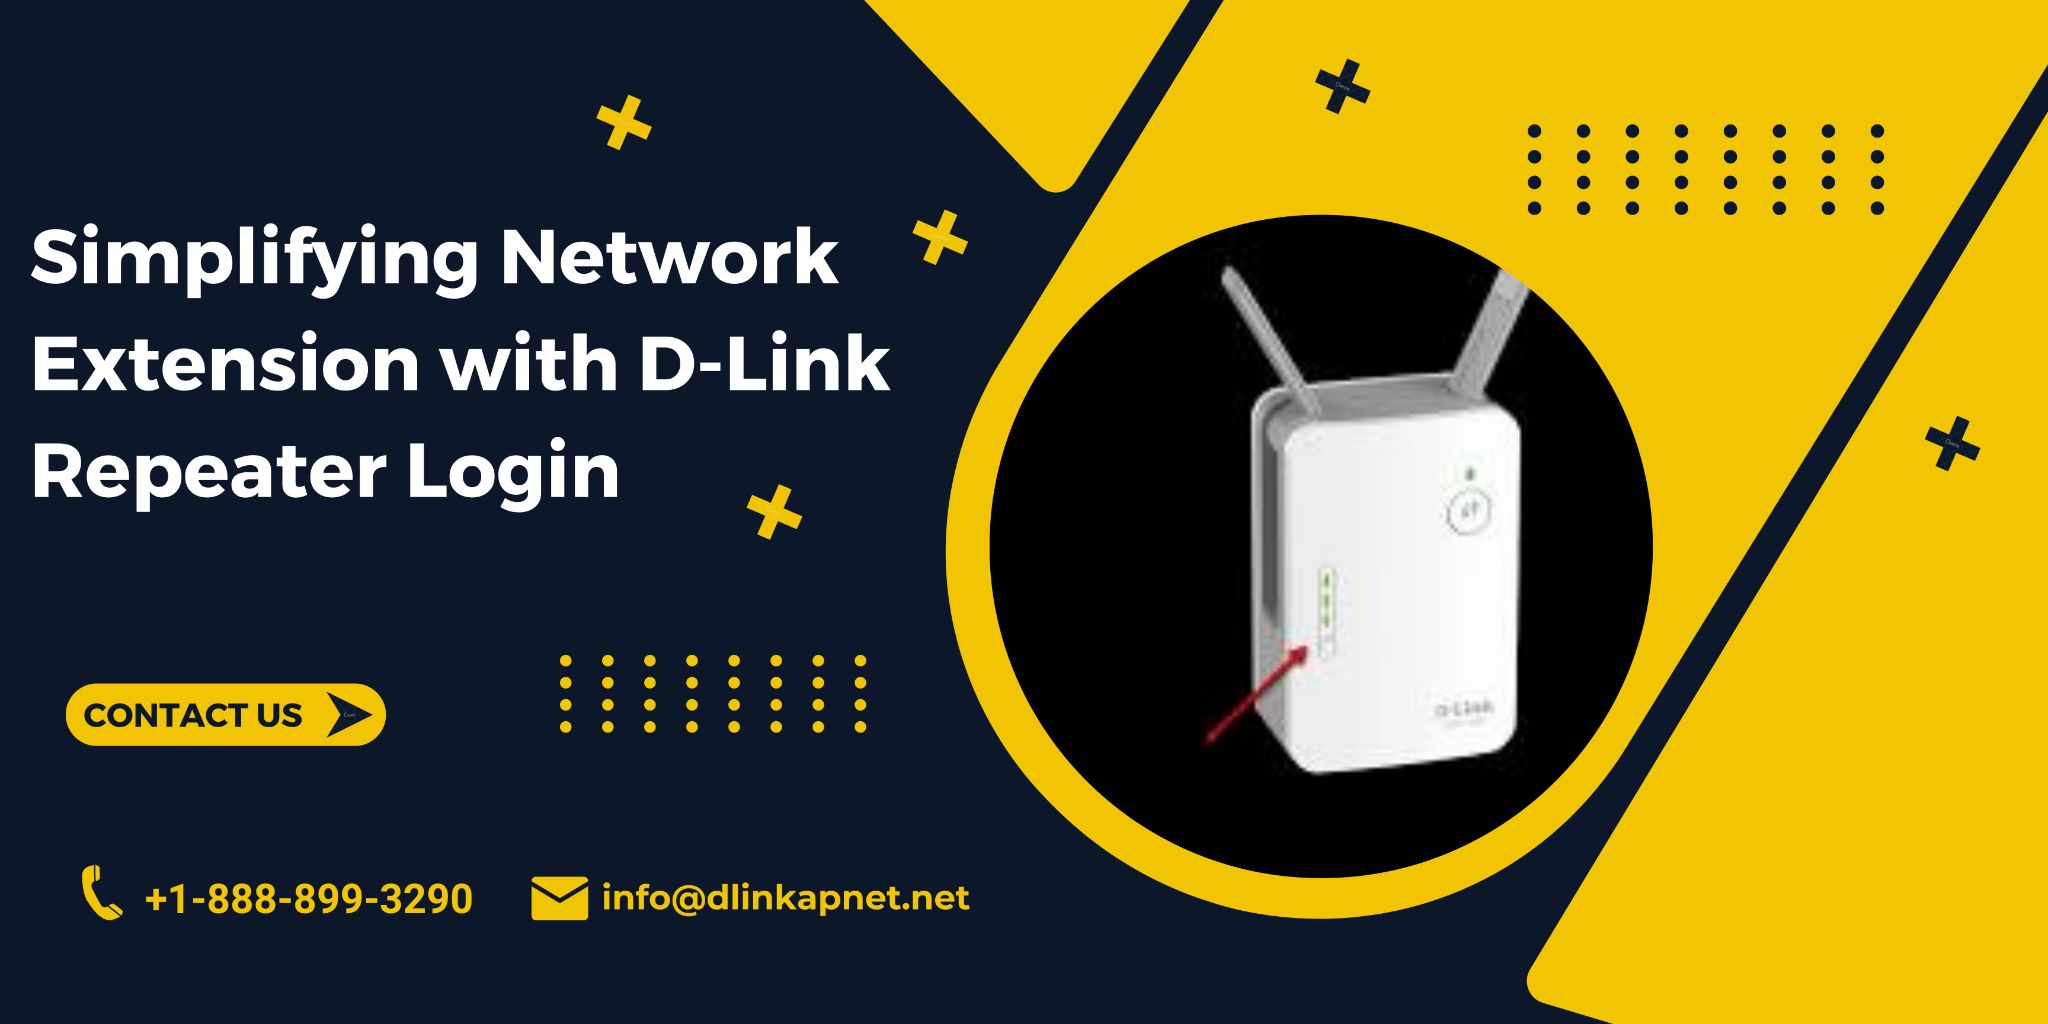  Simplifying Network Extension with D-Link Repeater Login | +1-888-899-3290 | Dlink Support